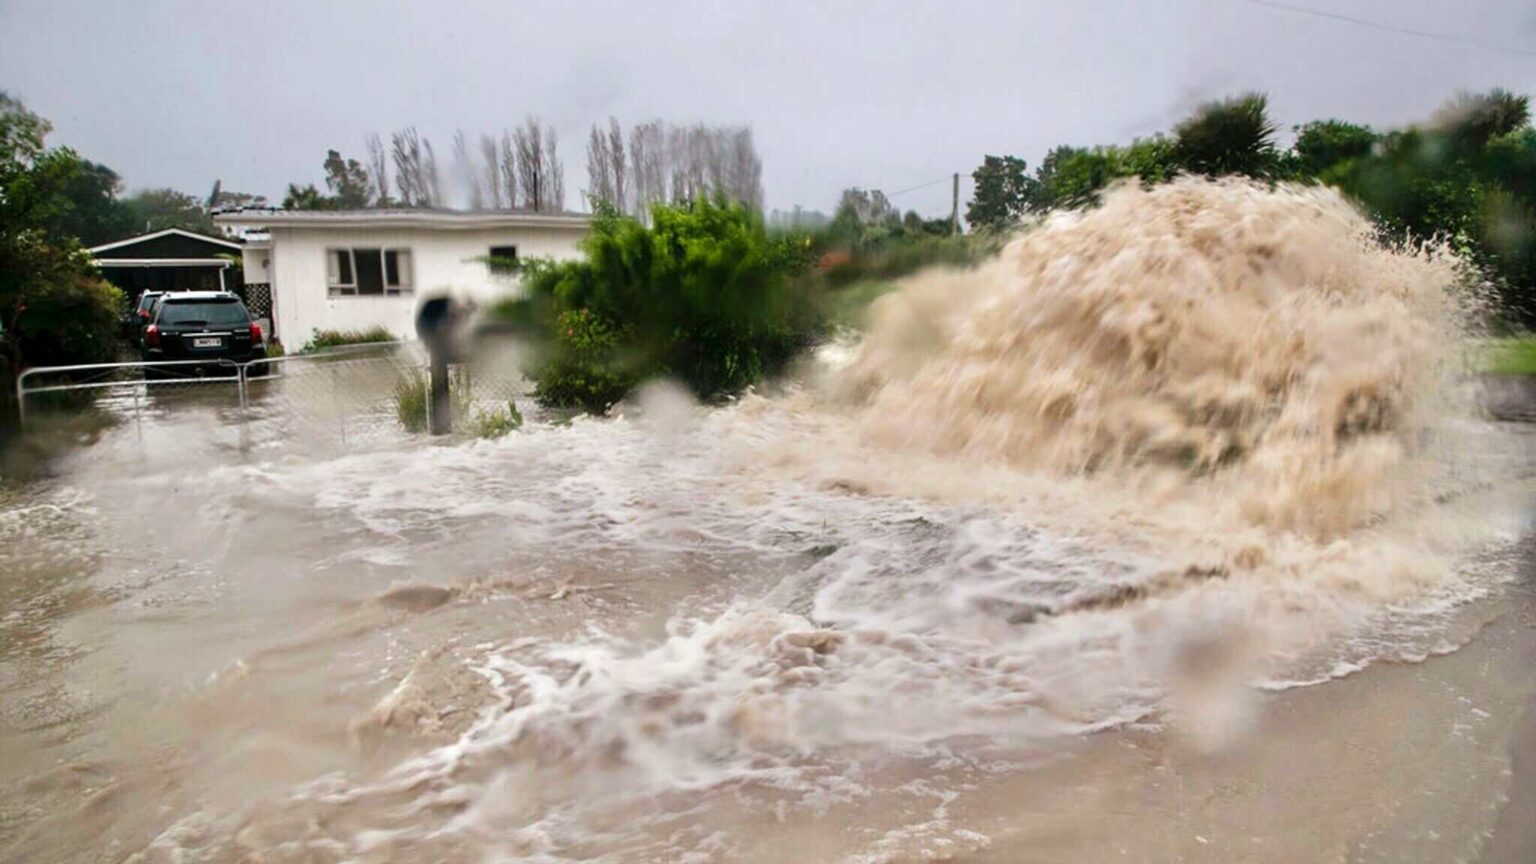 Cyclone hits New Zealand, state of emergency declared amid flooding